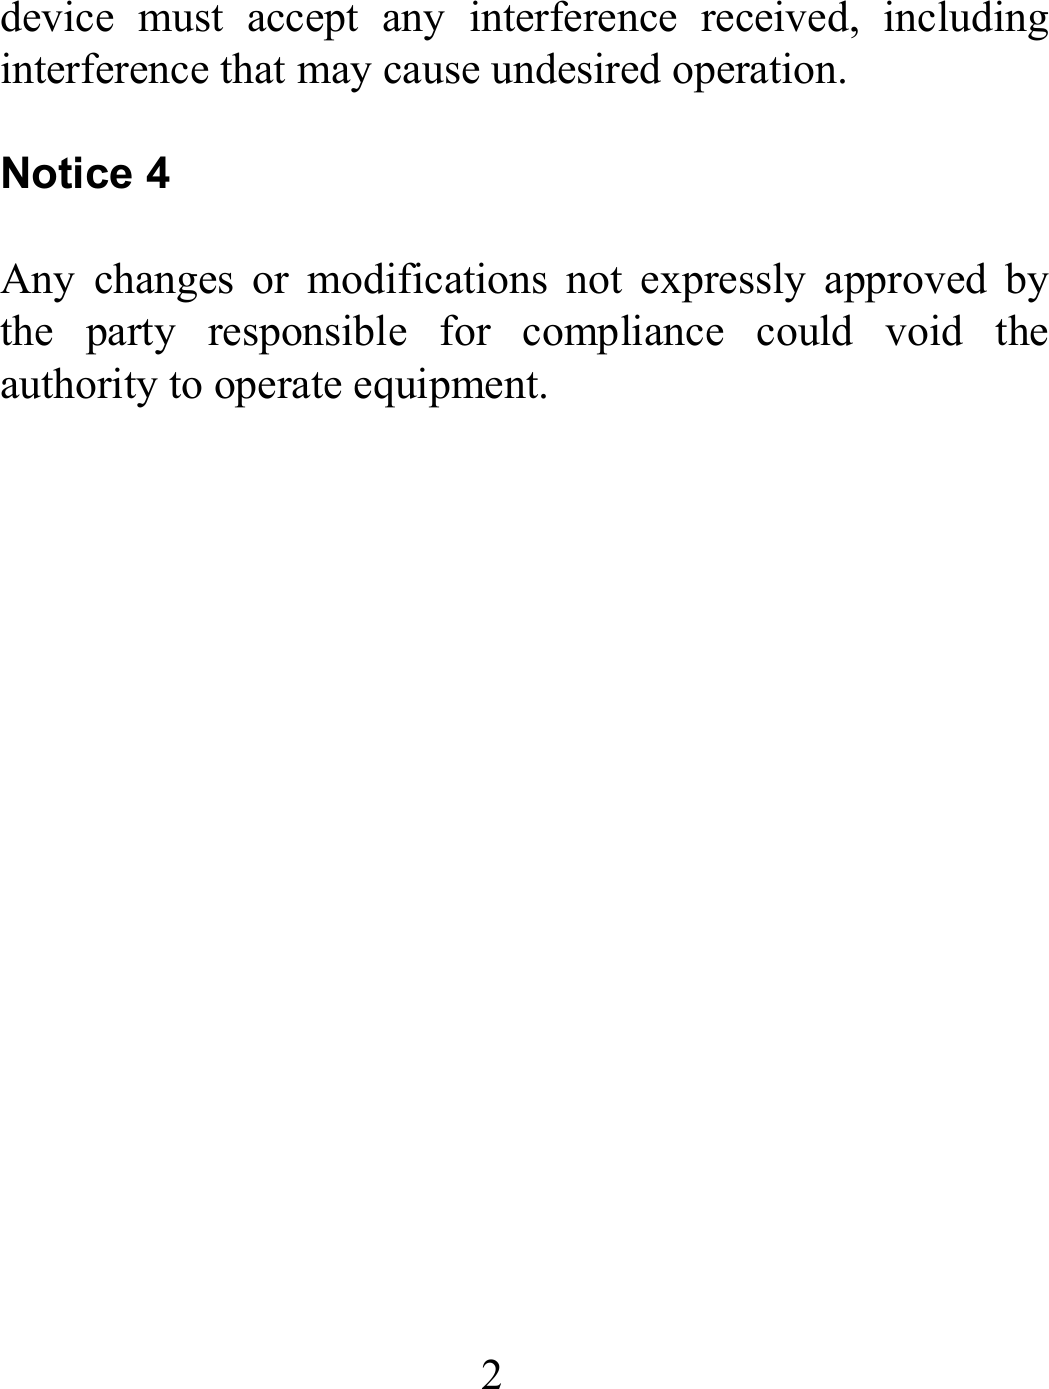 2 device must accept any interference received, including interference that may cause undesired operation.  Notice 4  Any changes or modifications not expressly approved by the party responsible for compliance could void the authority to operate equipment.  